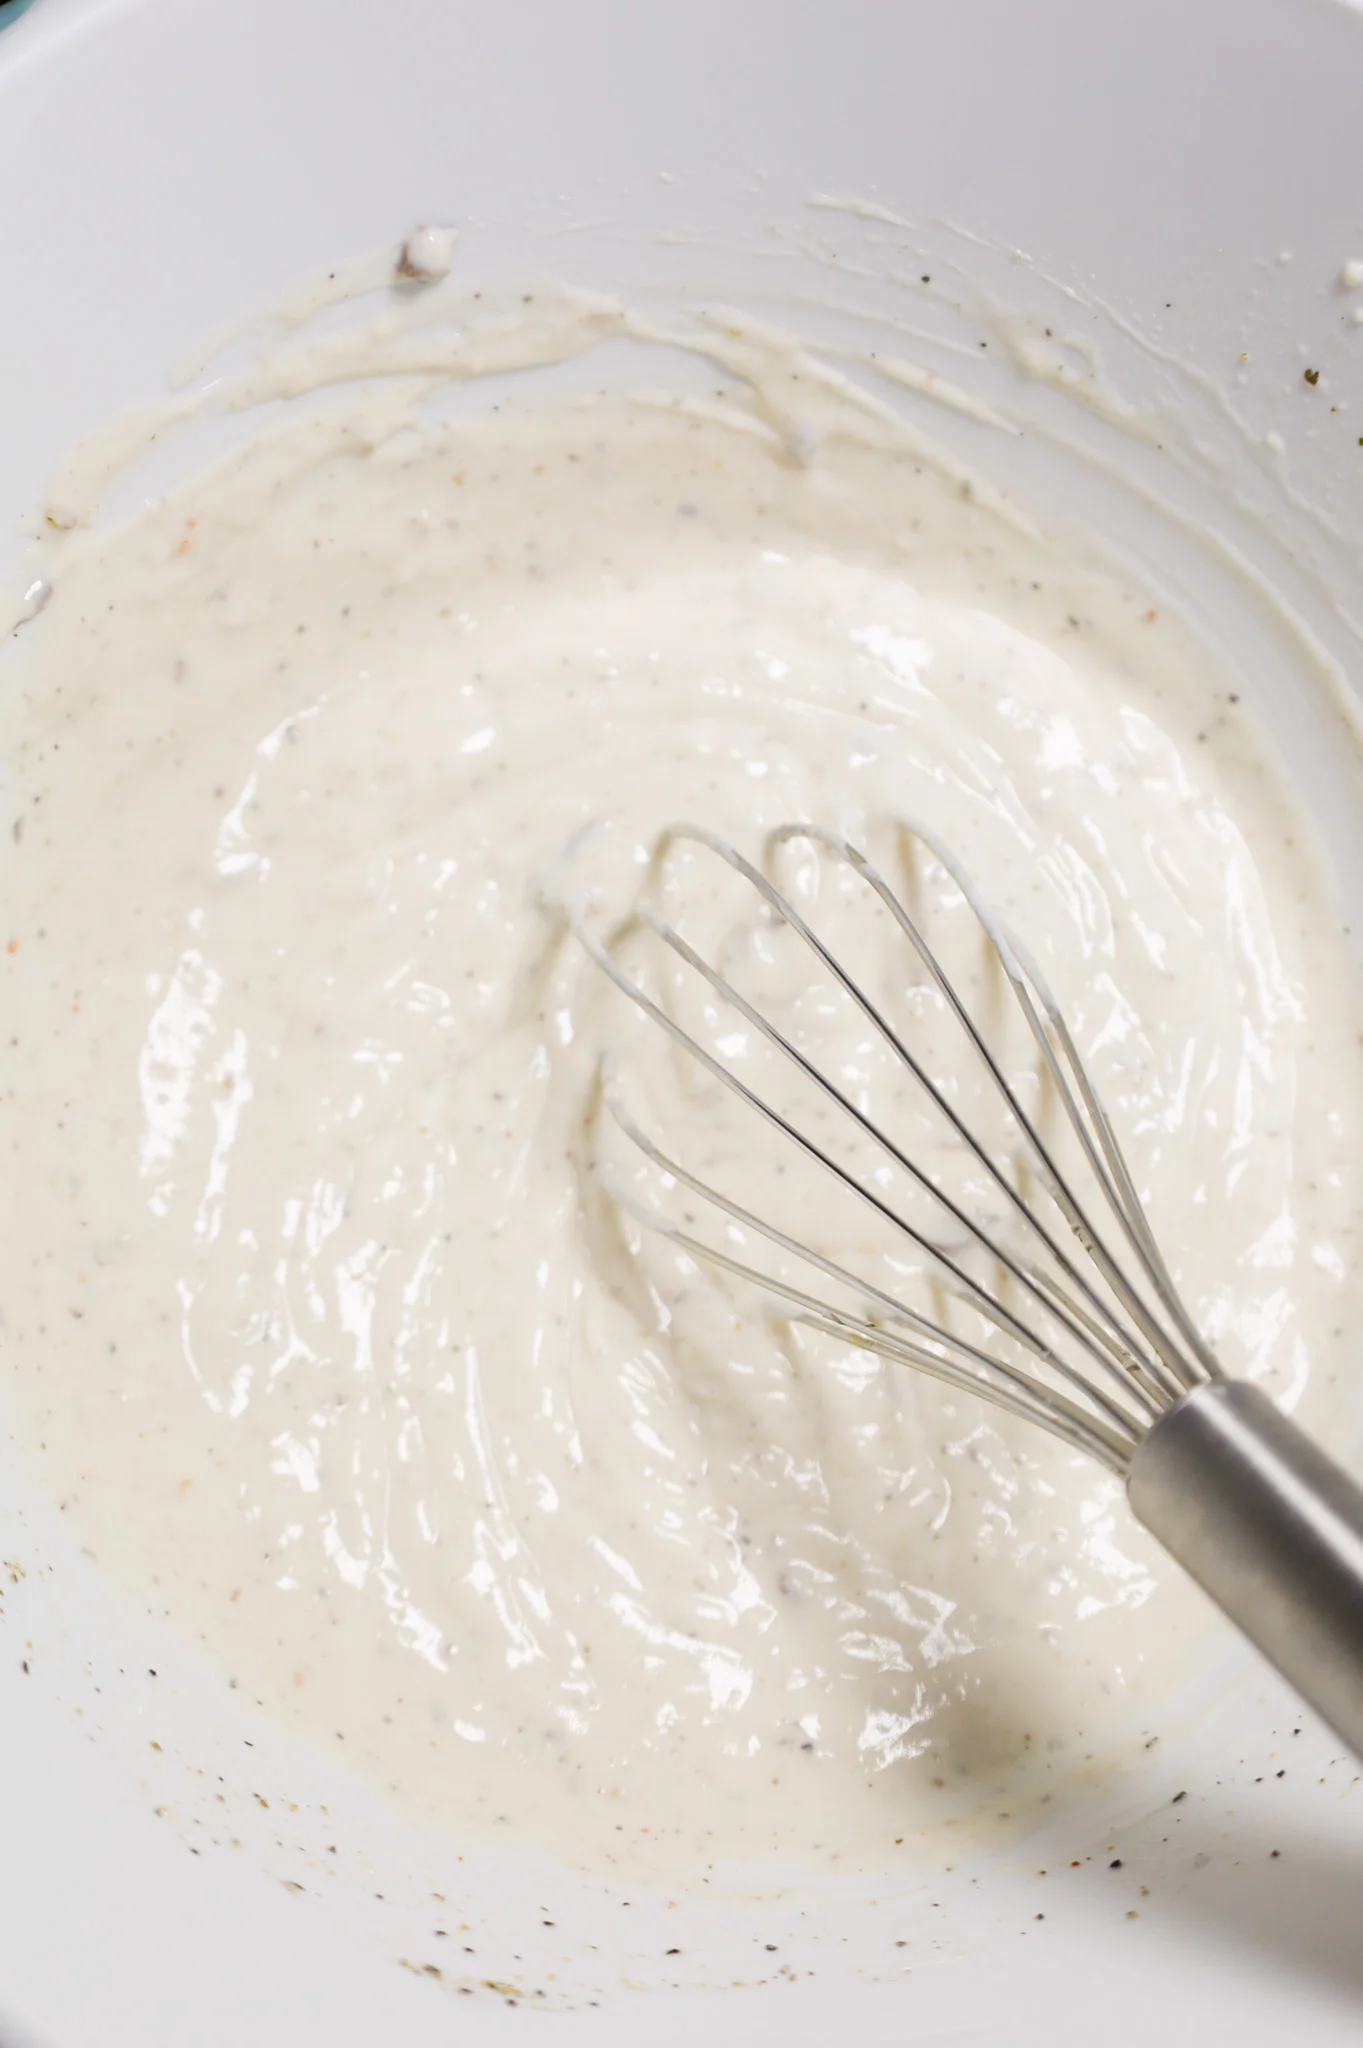 cream of mushroom soup, milk and sour cream whisked together in a mixing bowl